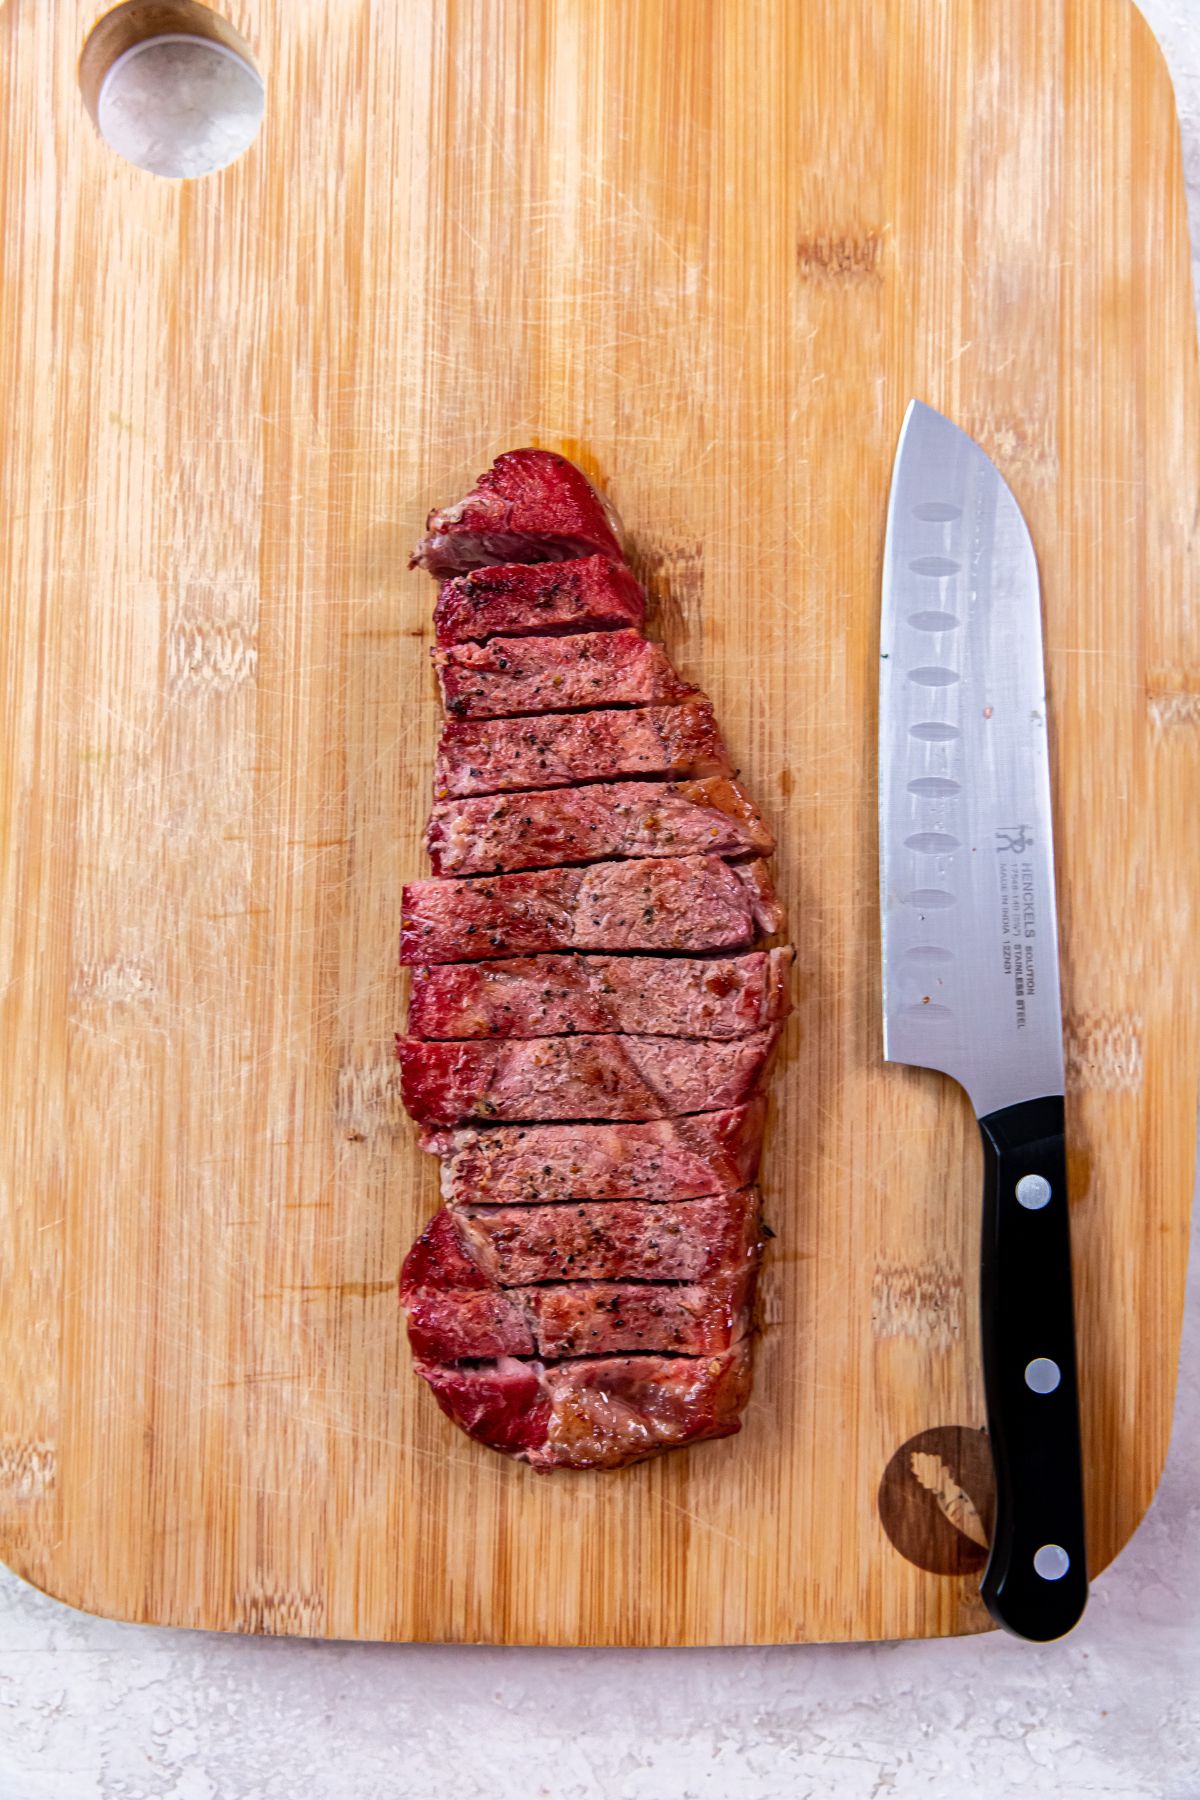 Smoked New York Strip Steaks on a cutting board with a knife